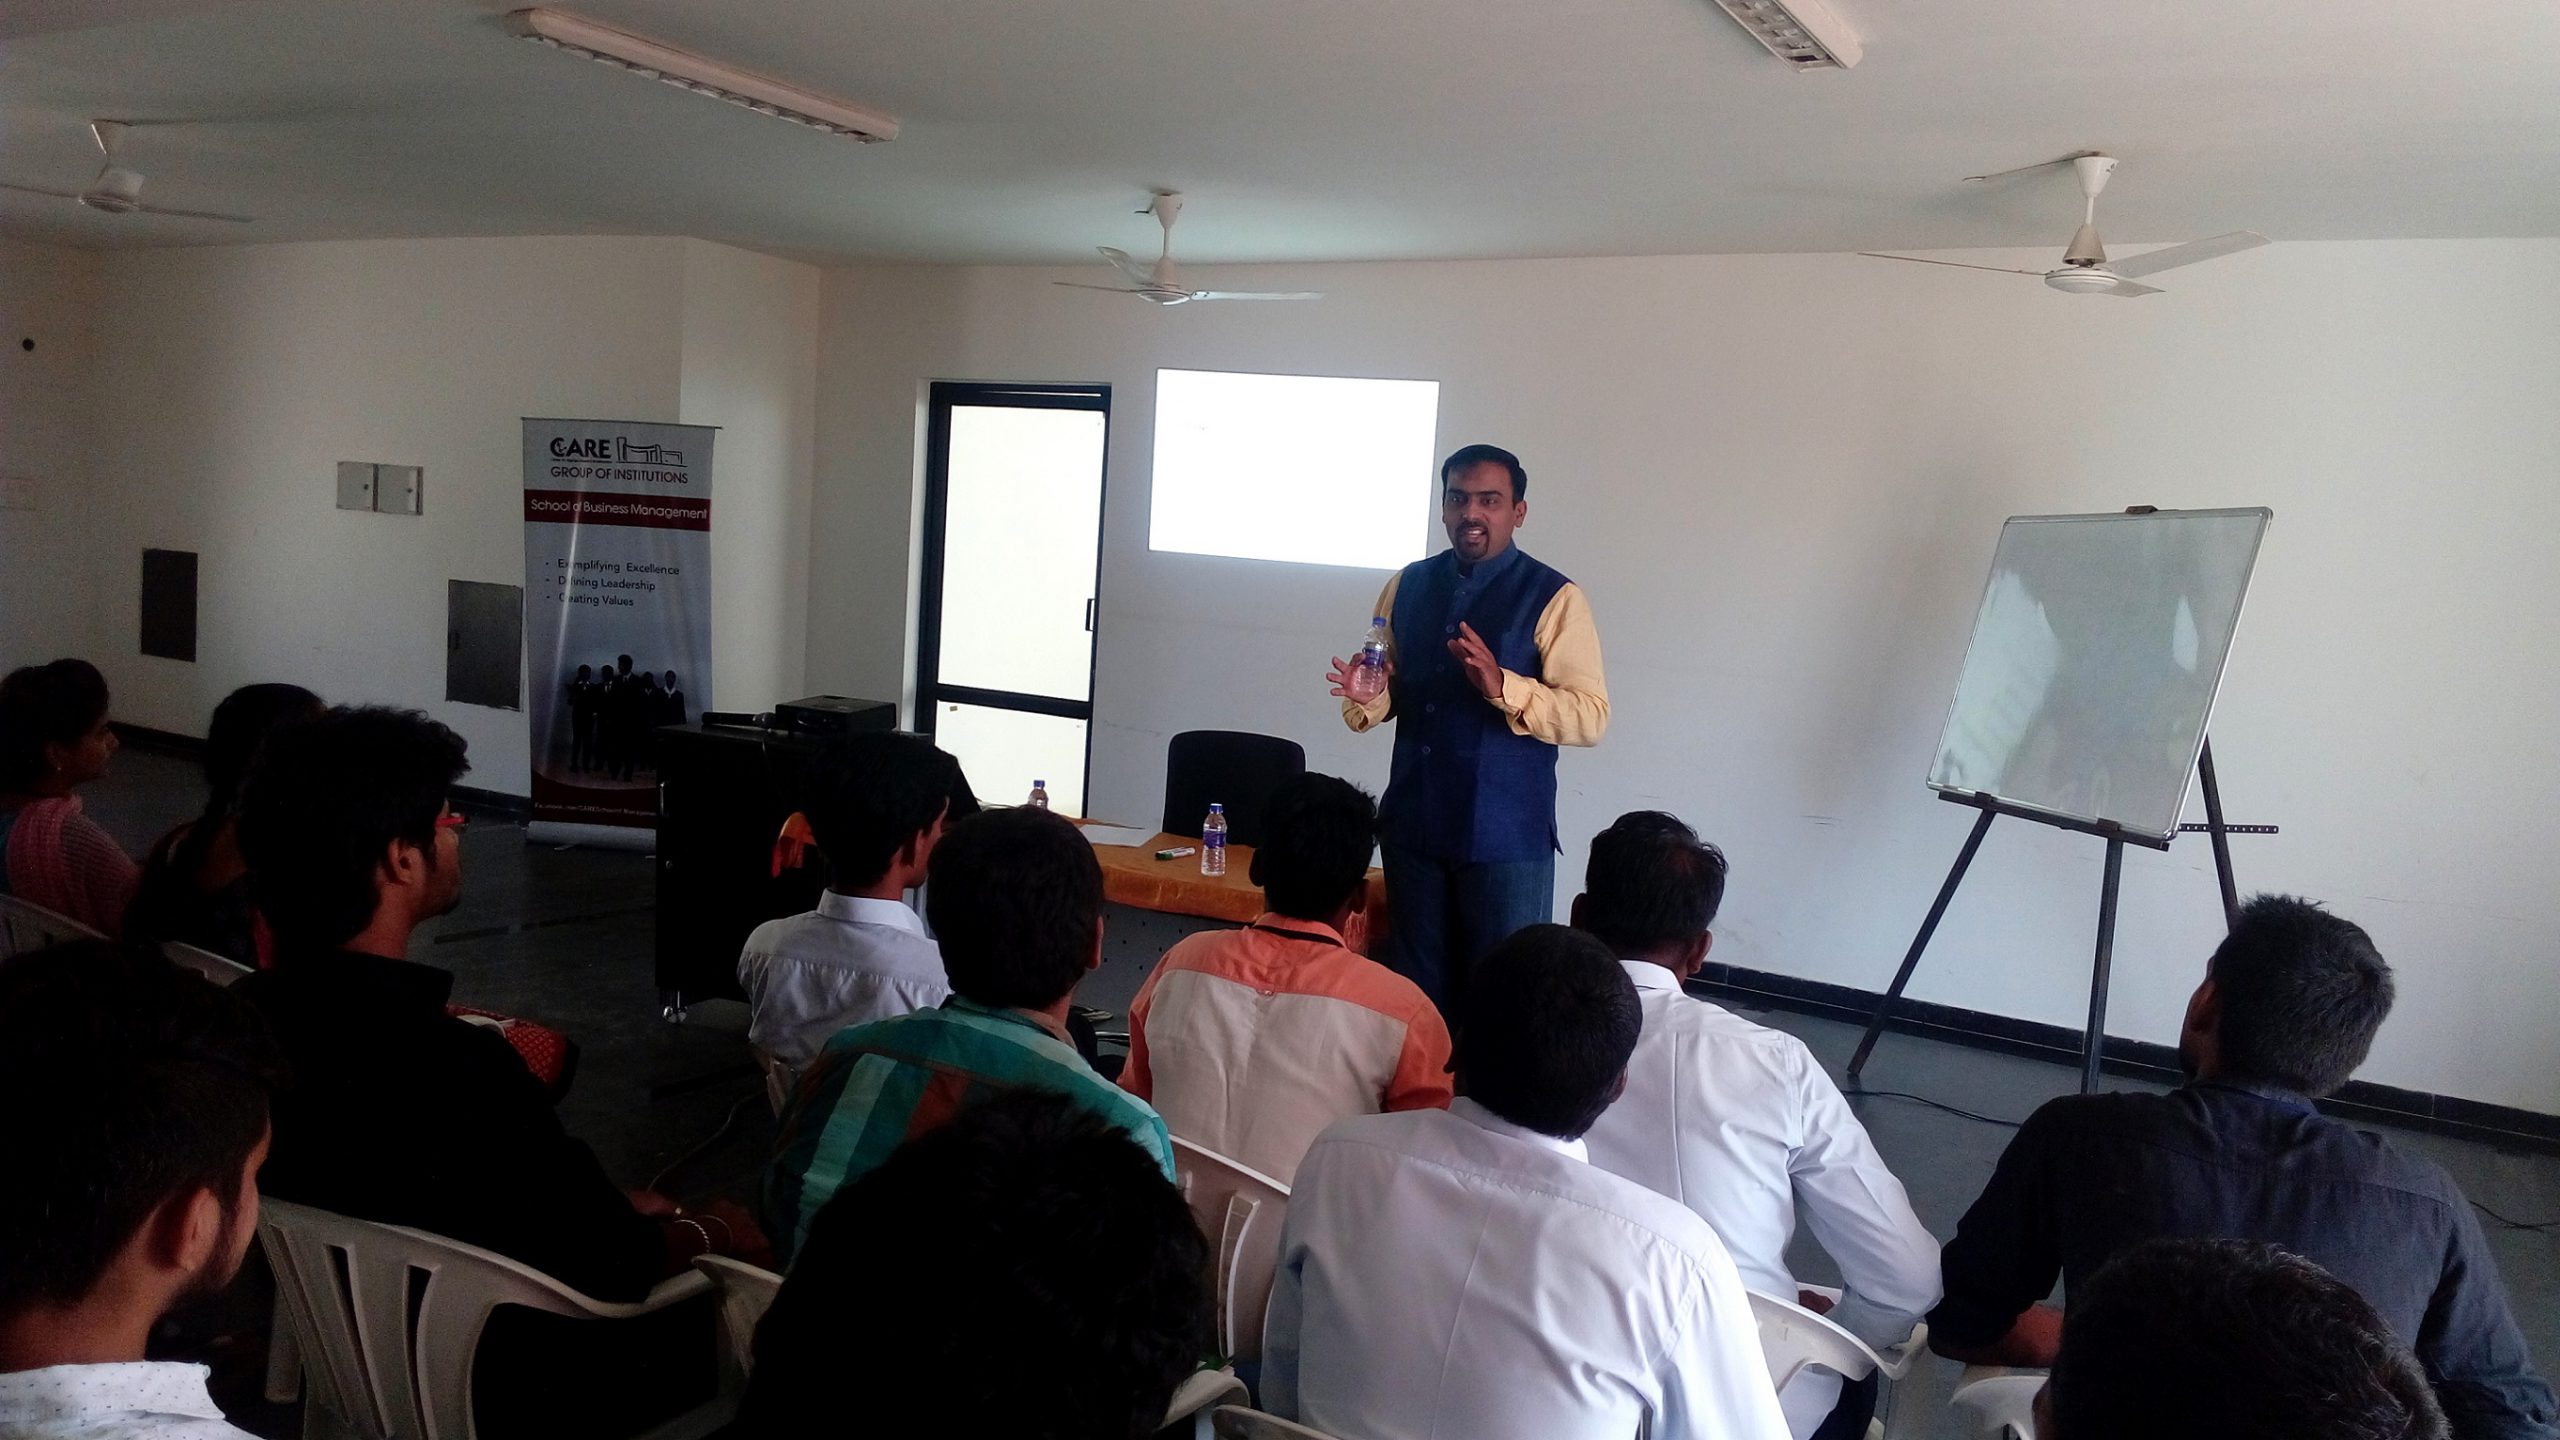 A guest lecture on “Advertising Strategy” – Mr. R.V. Prasad